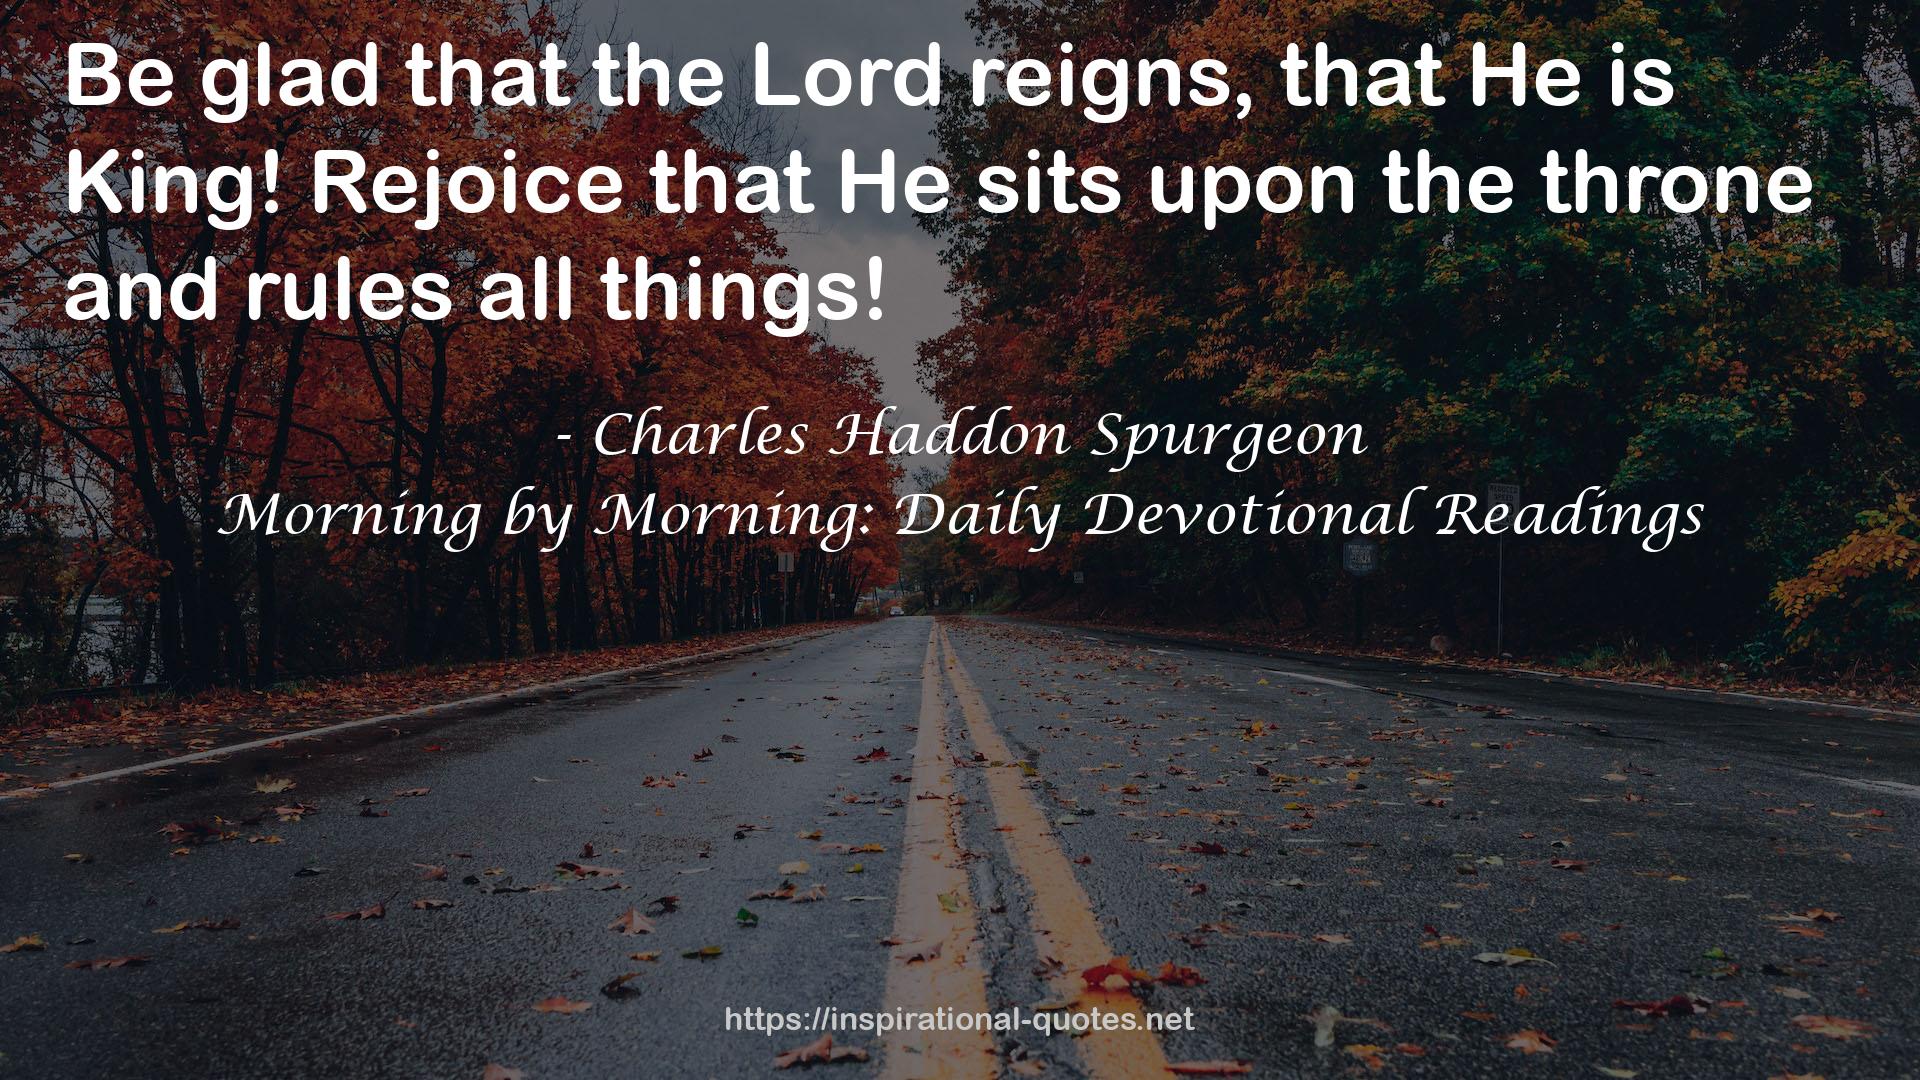 Morning by Morning: Daily Devotional Readings QUOTES